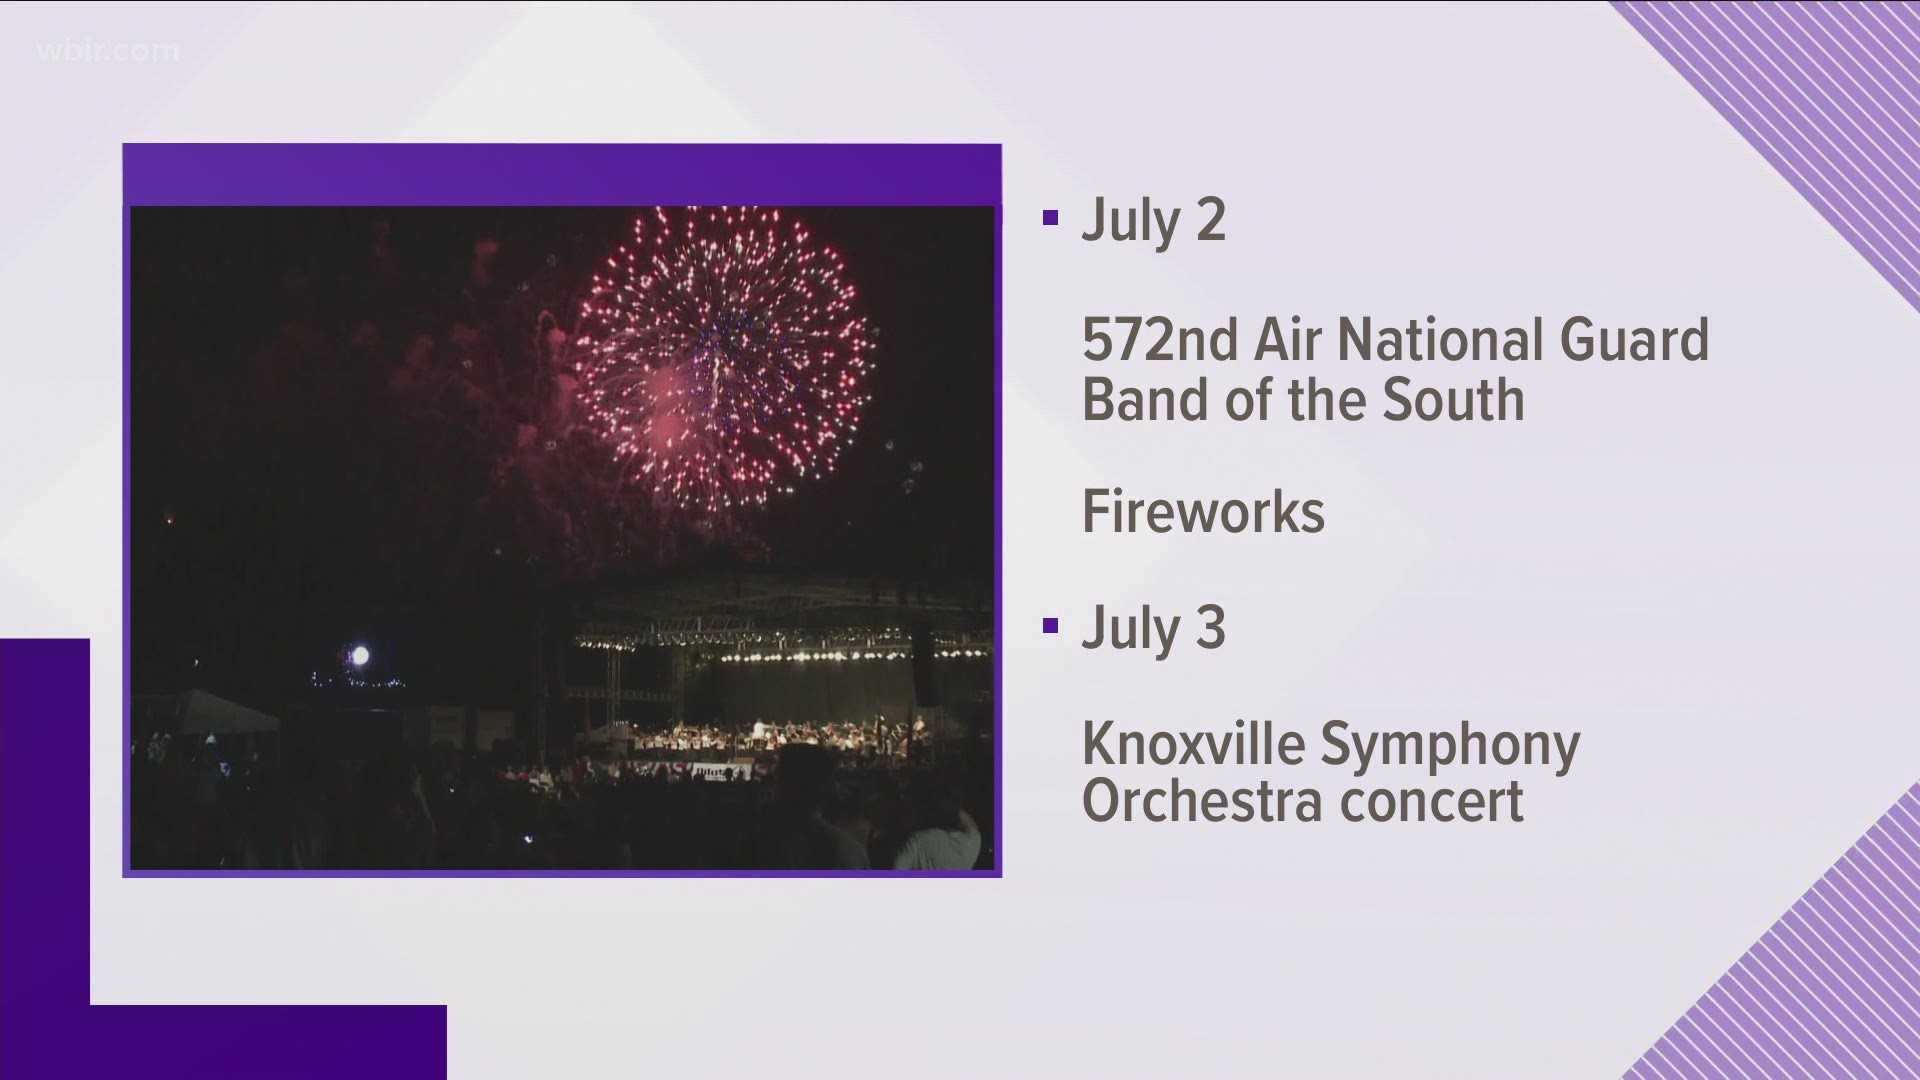 These are the upcoming Fourth of July events happening near you.